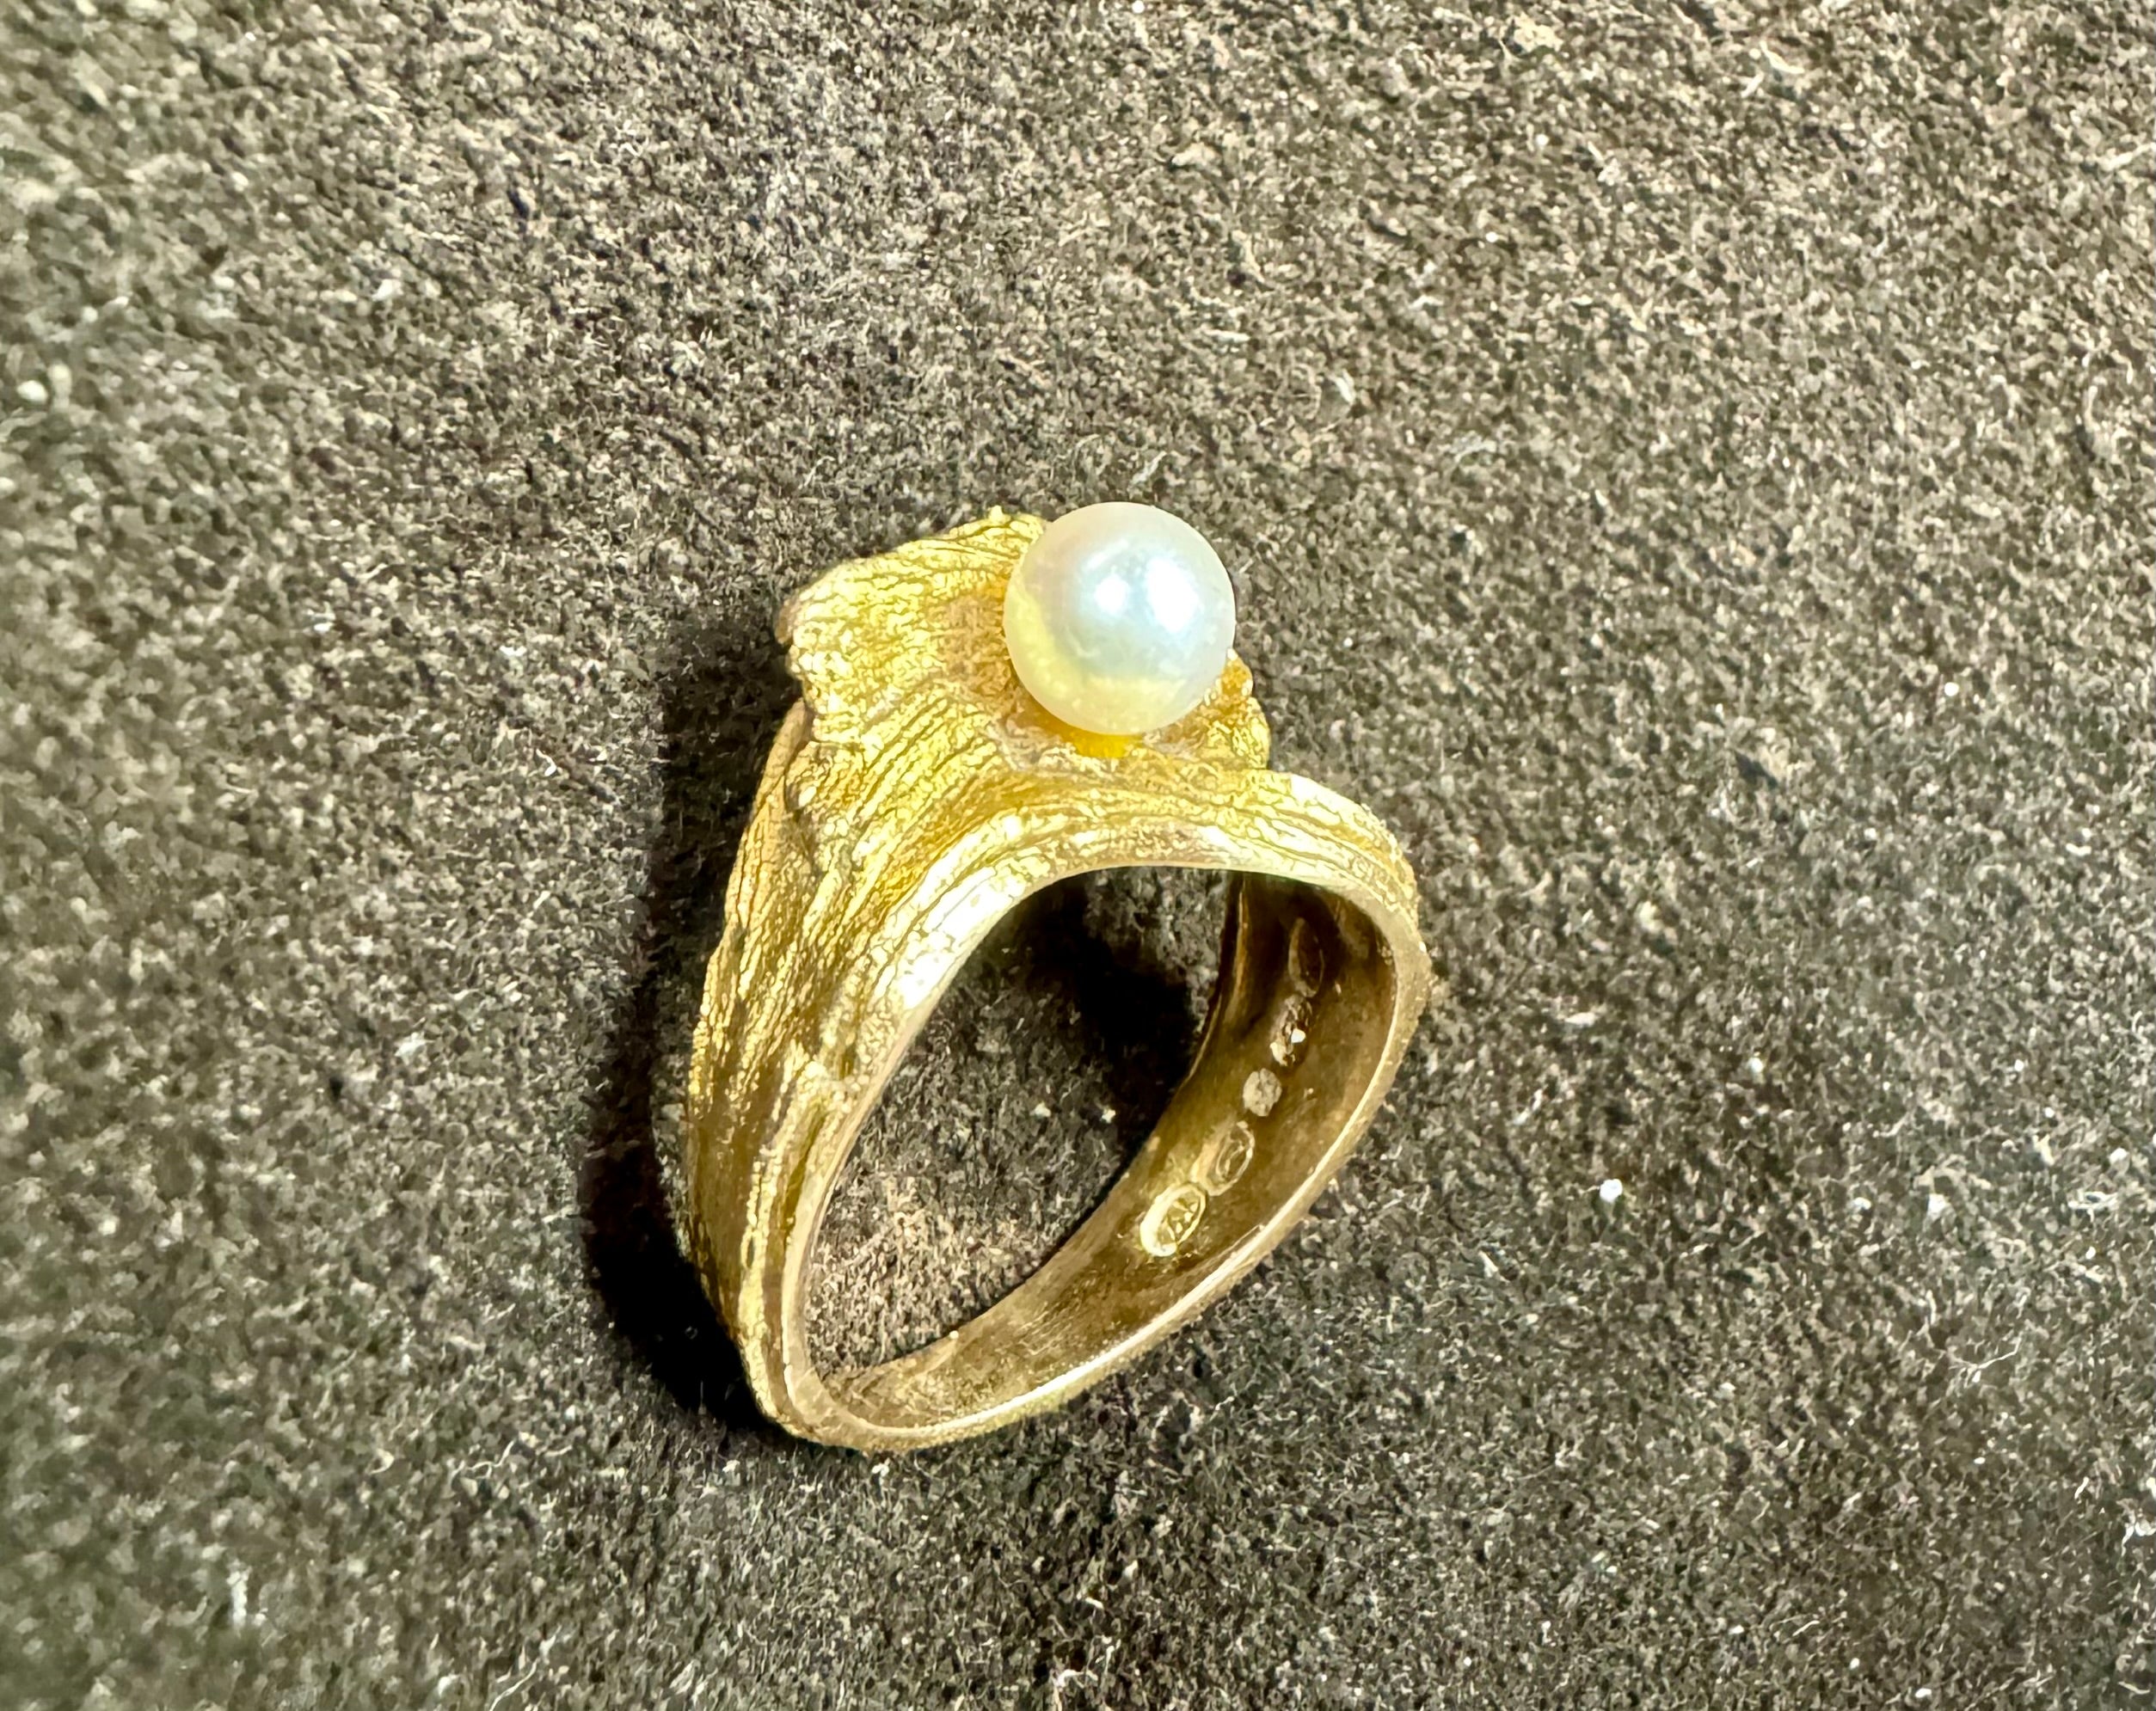 Finland Lapland magic.
14 karat Gold Pearl RingHelky Juvonen Design Finland
Made in 1972
US 7 (Rebel 17.75)
Manufactured by Nils Westerback Helsinki
Helky Juvonen's jewelry has the same spirit as the jewelry made by Björn Weckström Lapponia.

I have